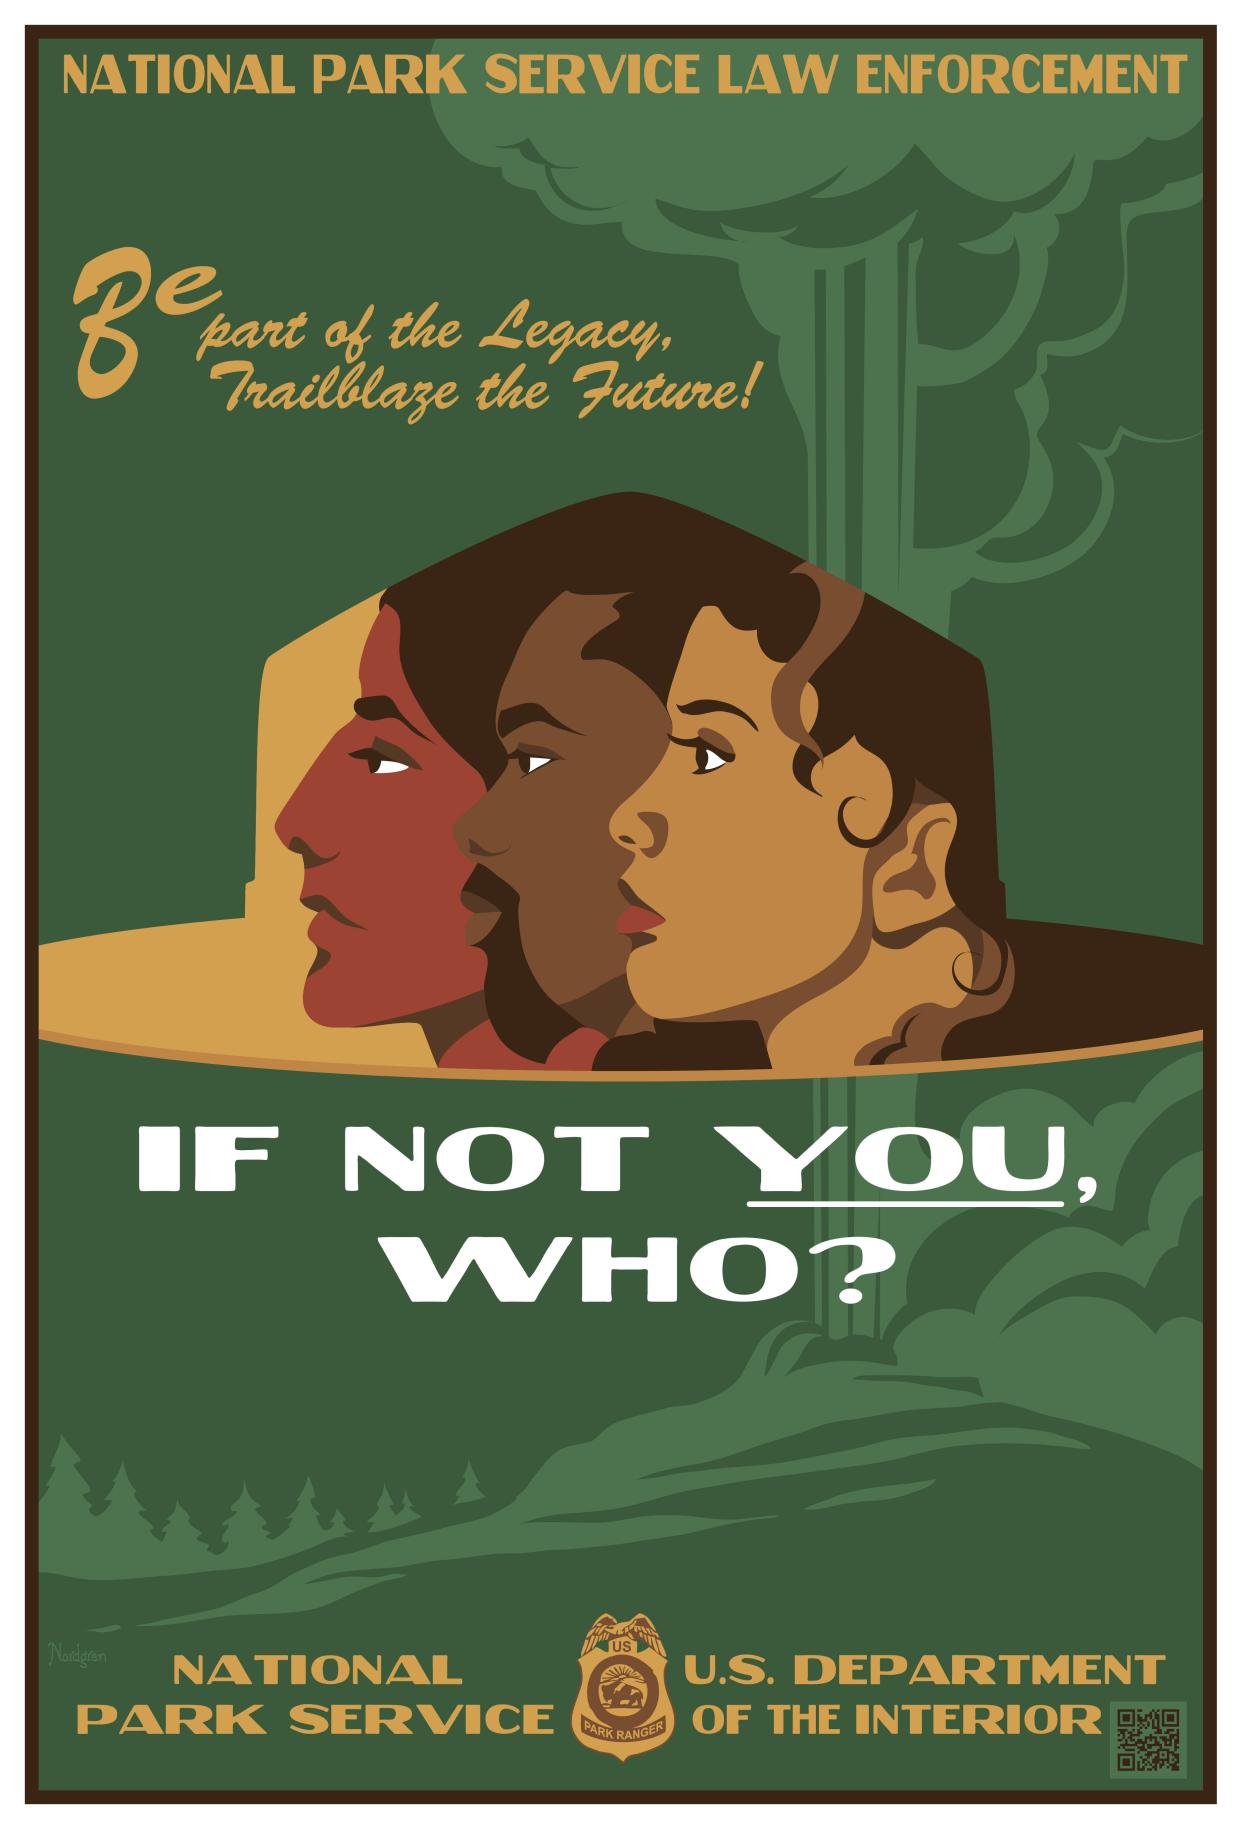 One of the posters released as part of a National Park Service hiring initiative aiming to recruit diverse candidates.